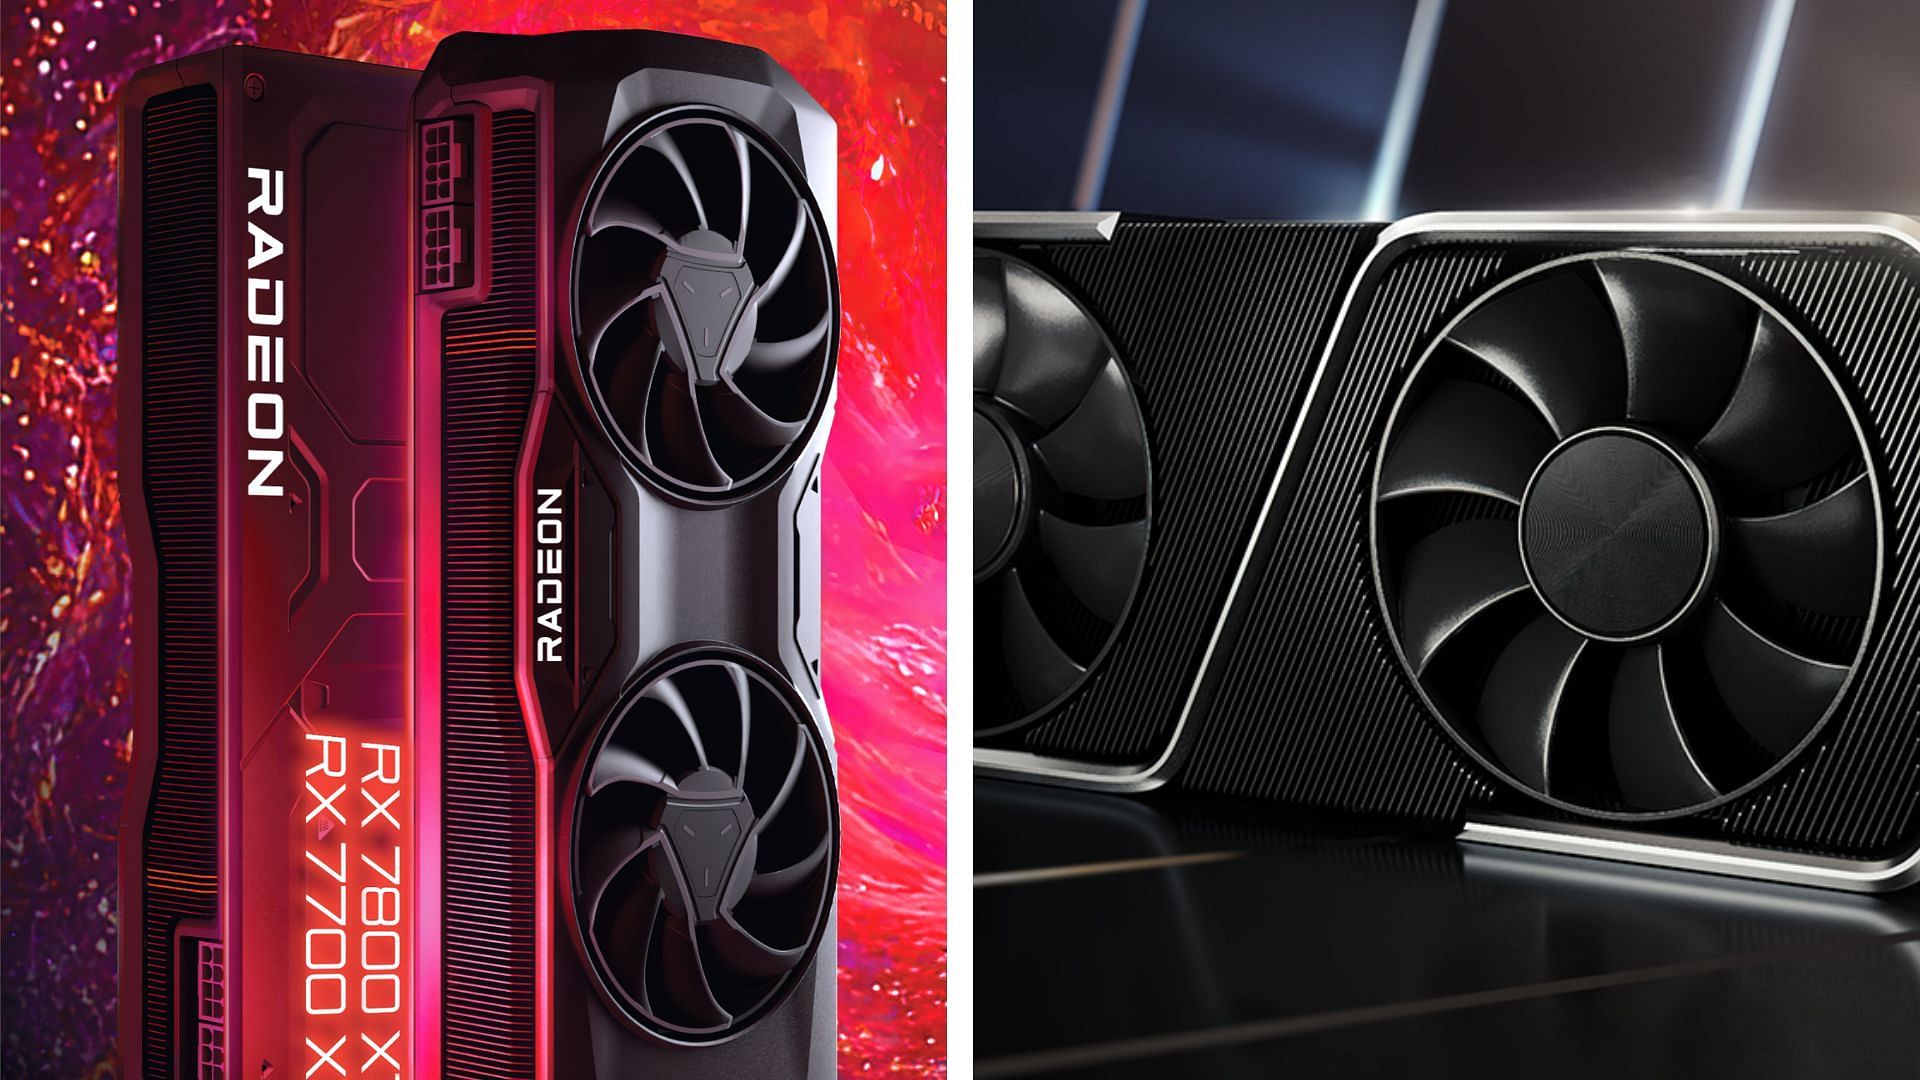 The AMD Radeon RX 7700 XT is more powerful than the RTX 3060 Ti (Image via AMD and Nvidia)